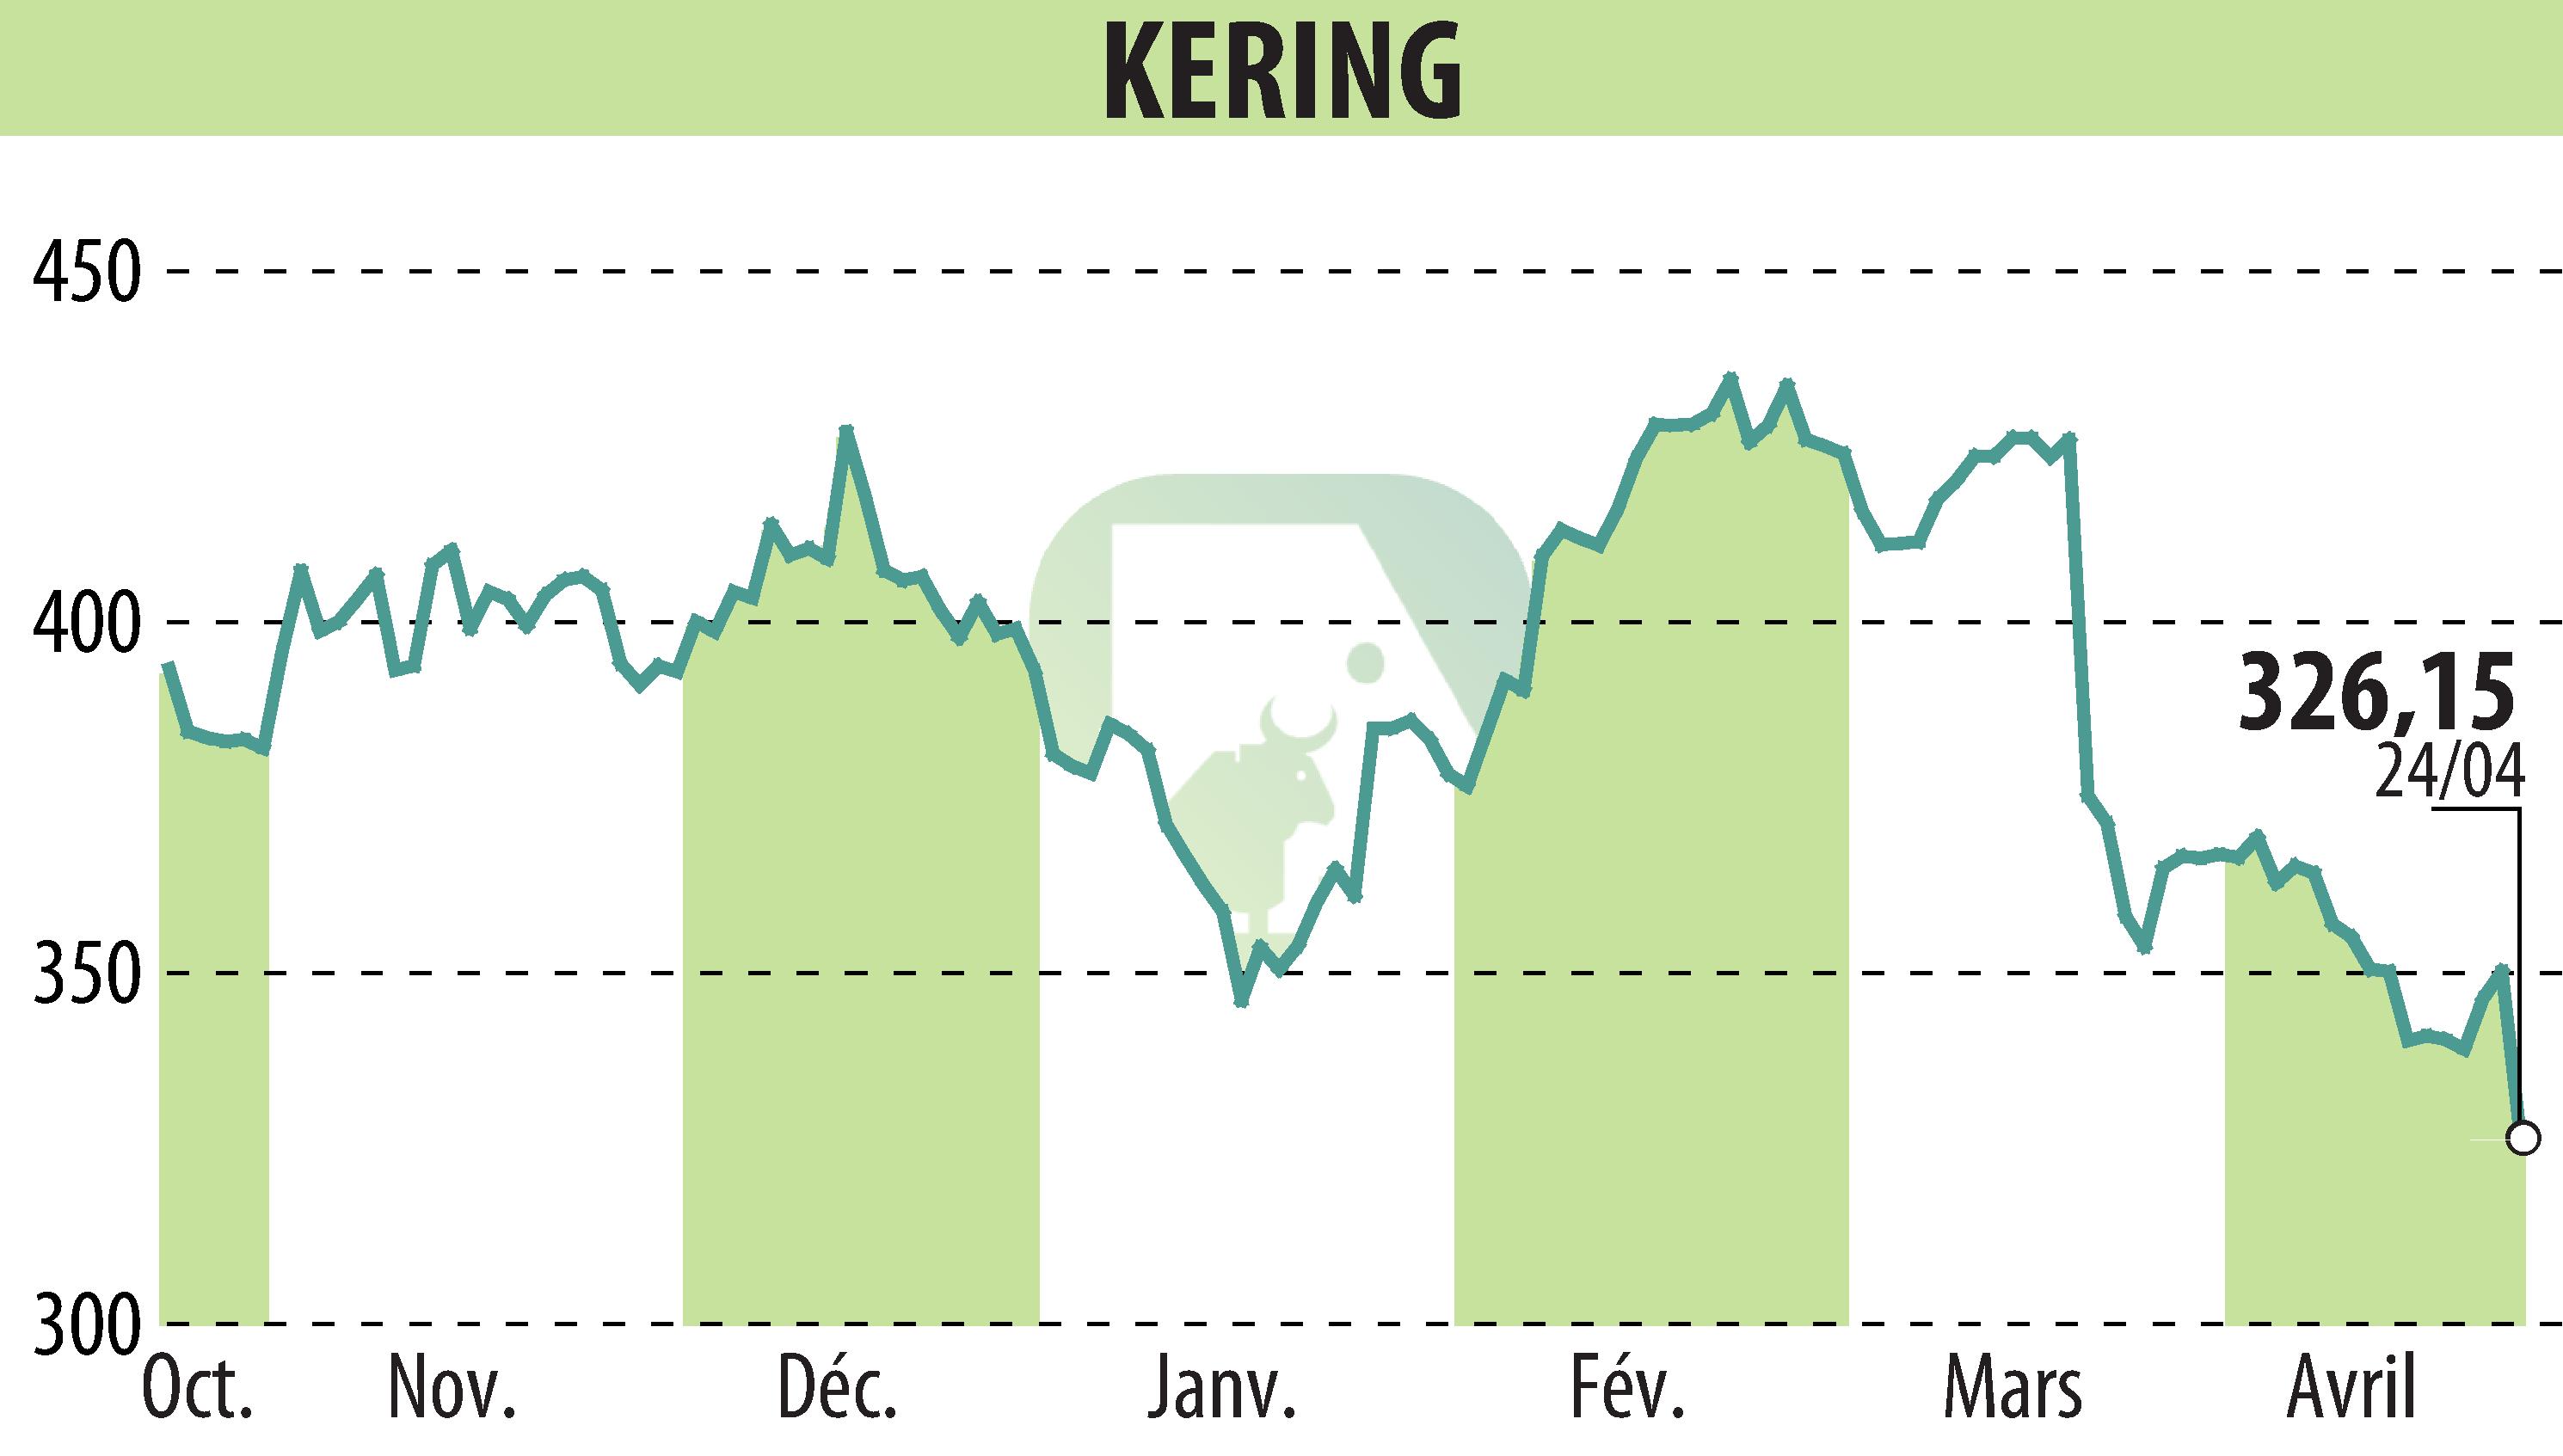 Stock price chart of KERING (EPA:KER) showing fluctuations.